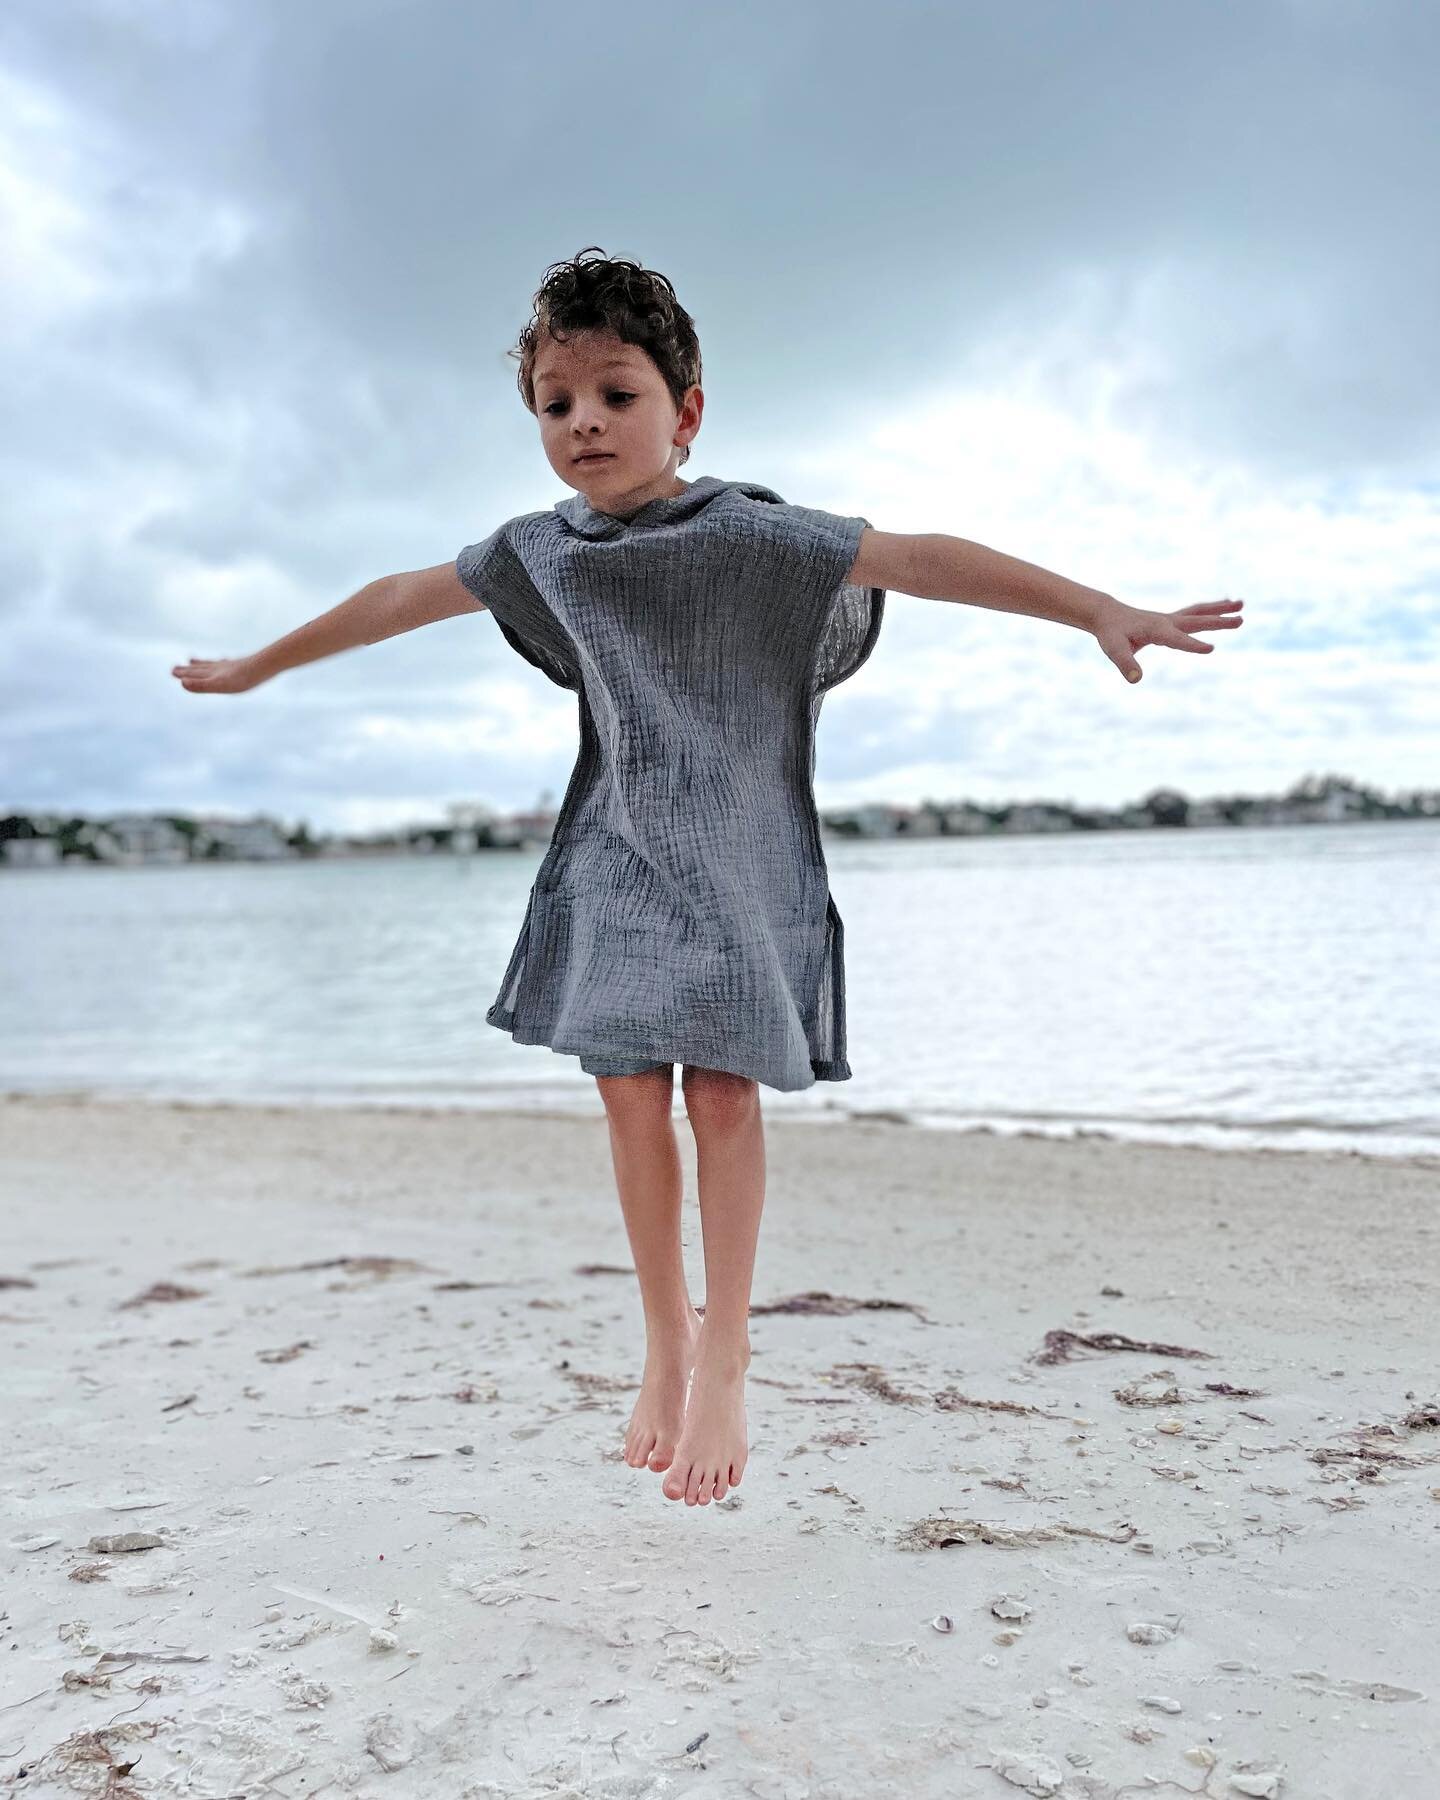 Exploring, dreaming big and taking it all in. Here is to life through a child&rsquo;s eyes.
◽️
Kids' Ojo Poncho now available at artguyworkshop.com
◽️
Hooded, flowy, comfy poncho for all the fun. Quick to dry. 

#youarehere #hereisgood #mindfulnesspr